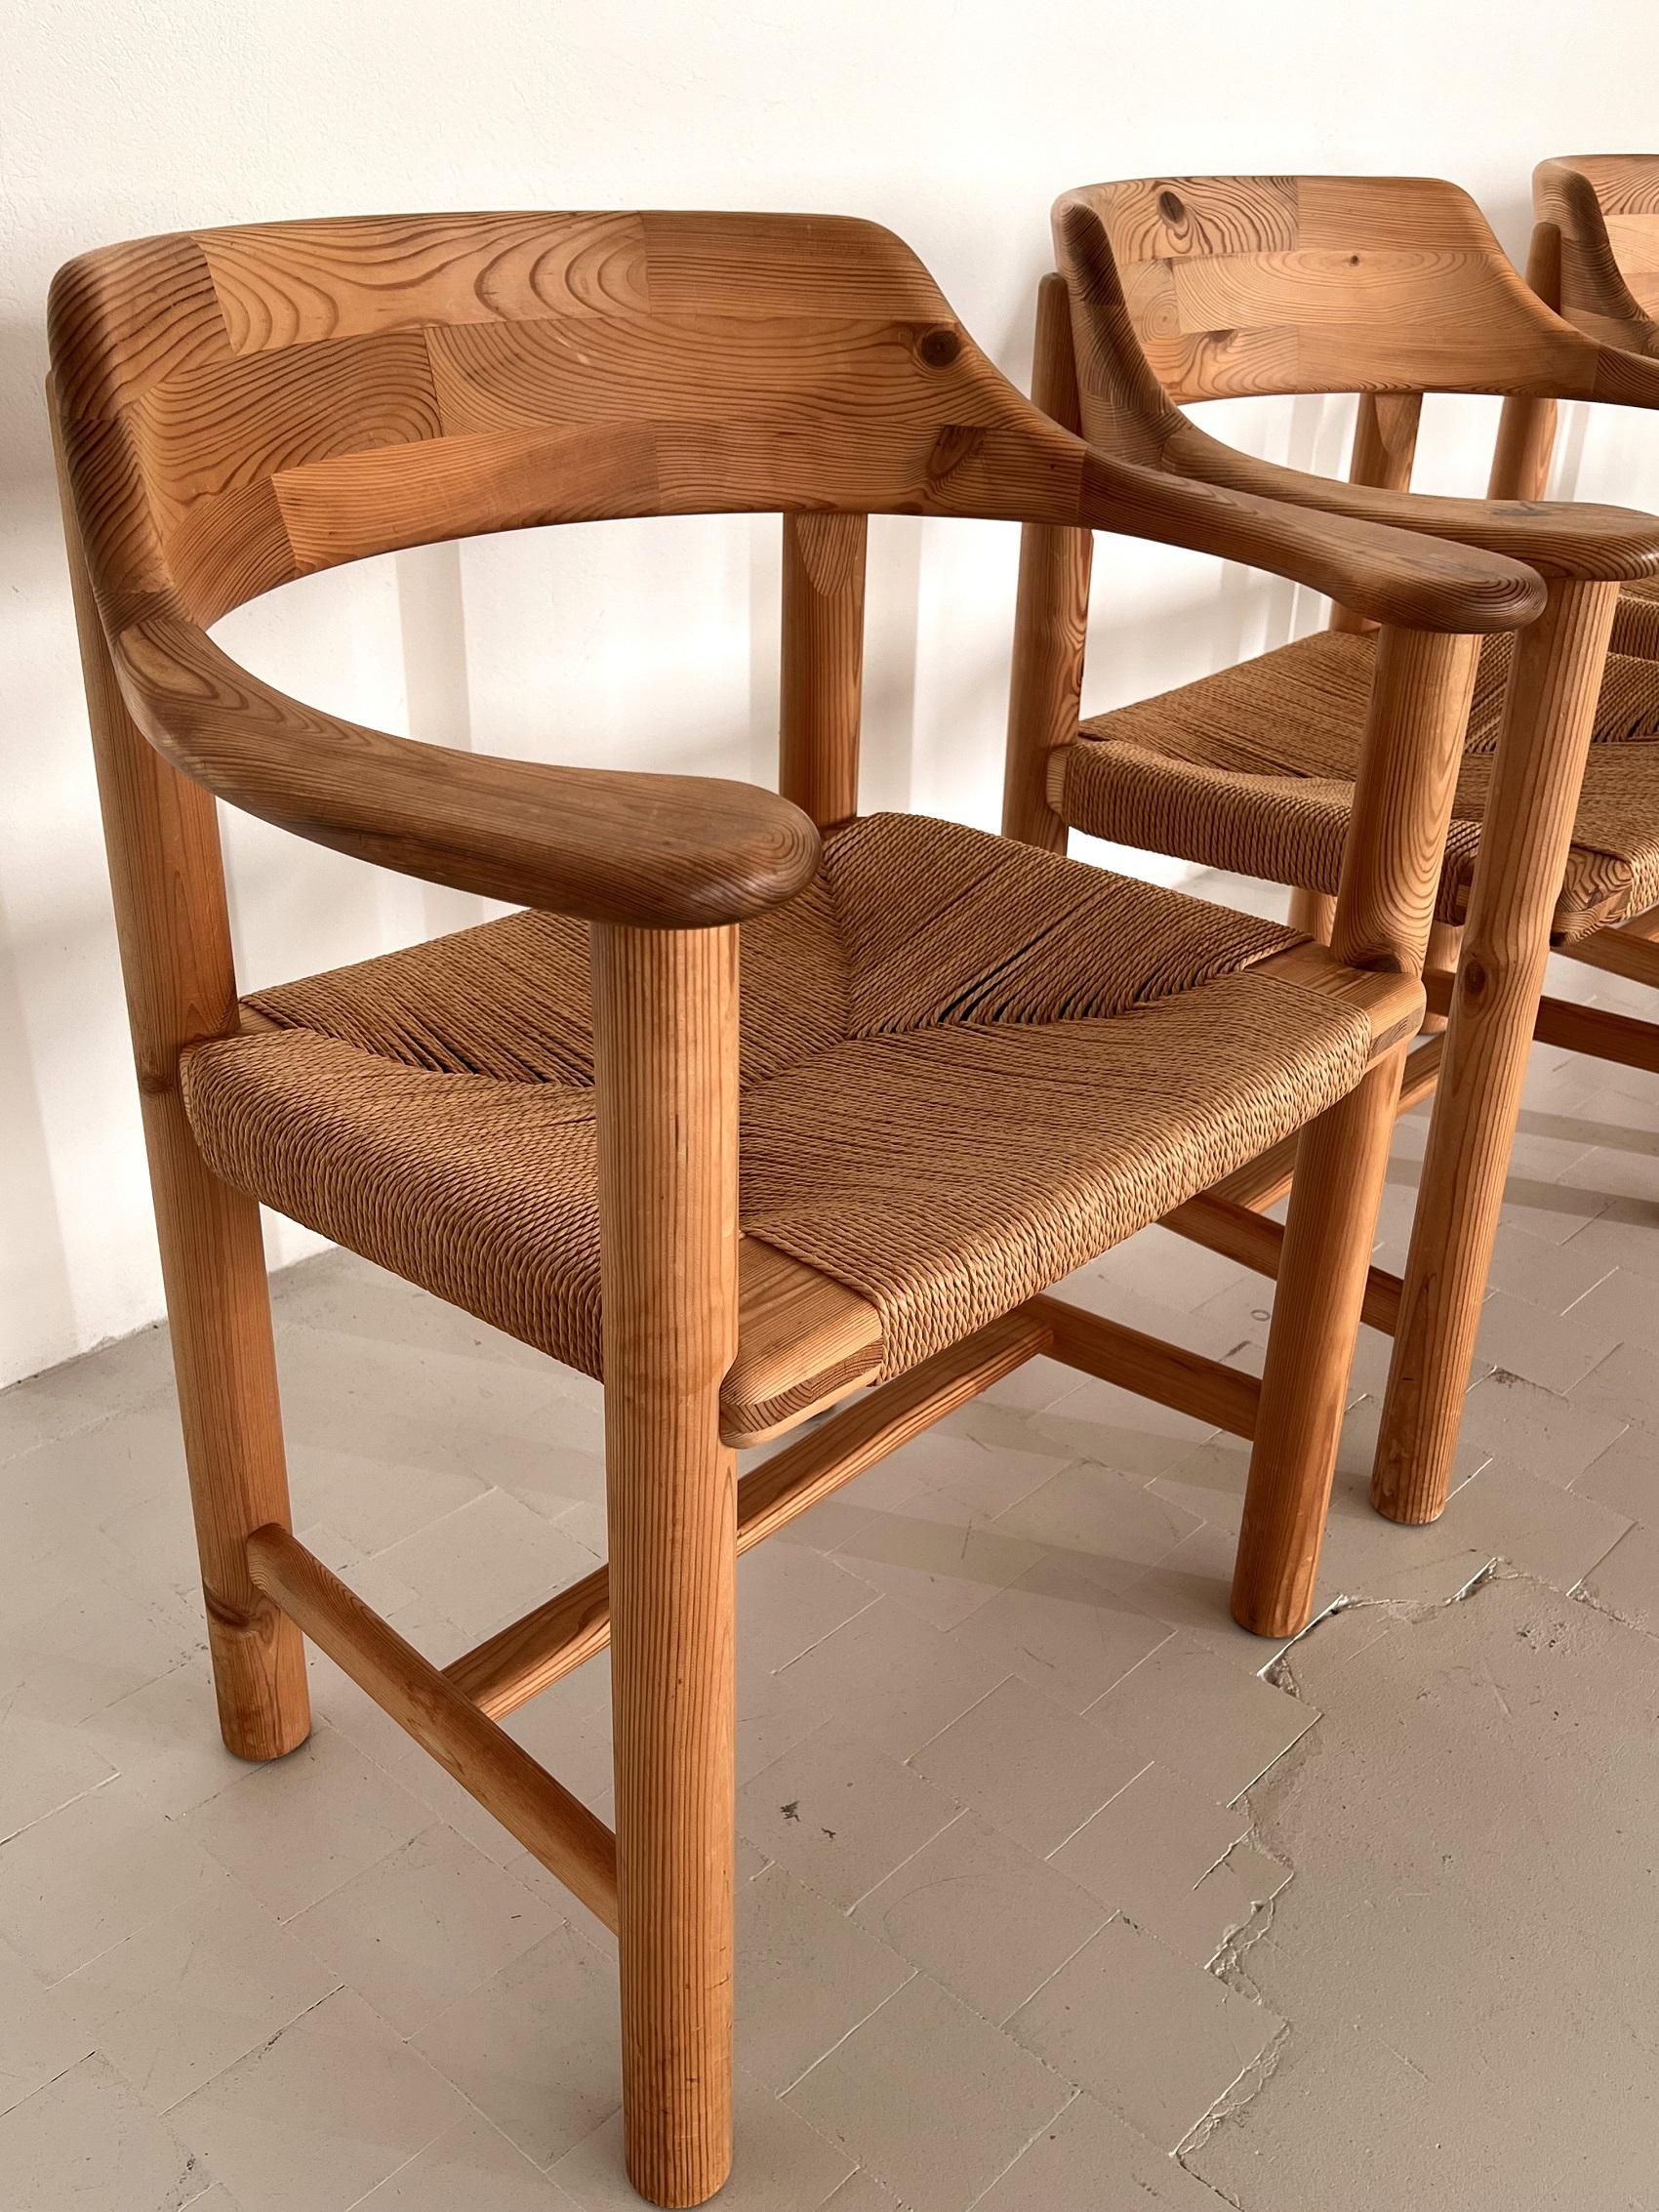 Rainer Daumiller Dining Chairs in Pine and Paper Cord, 1970s For Sale 2